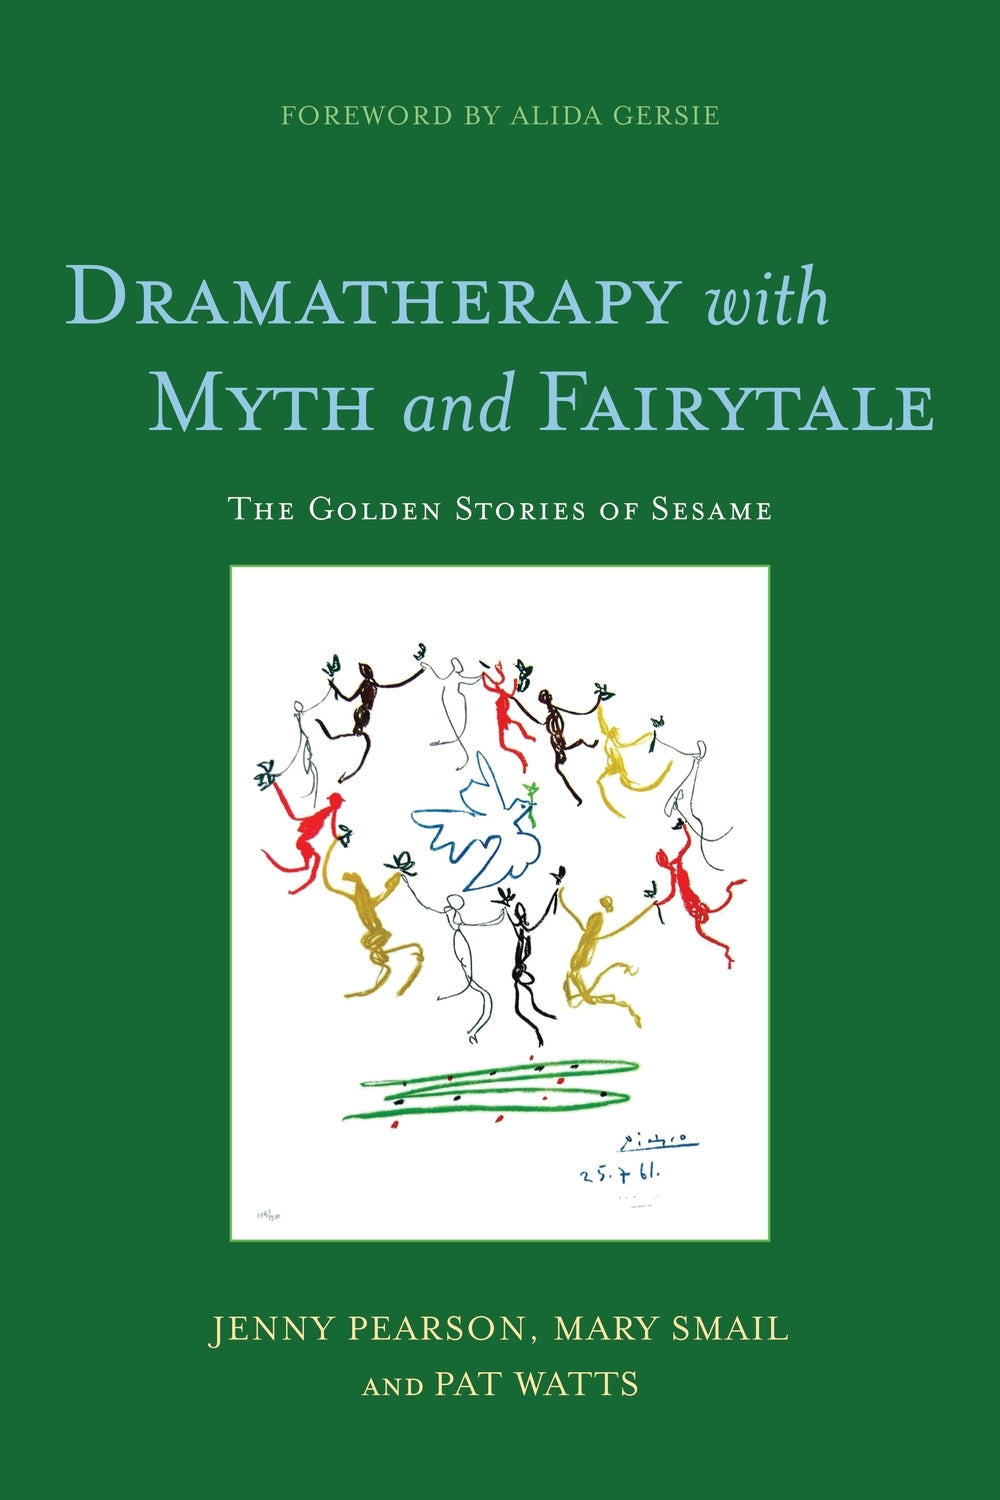 Dramatherapy with Myth and Fairytale by Pat Watts, Camilla Jessel, Jenny Pearson, Mary Smail